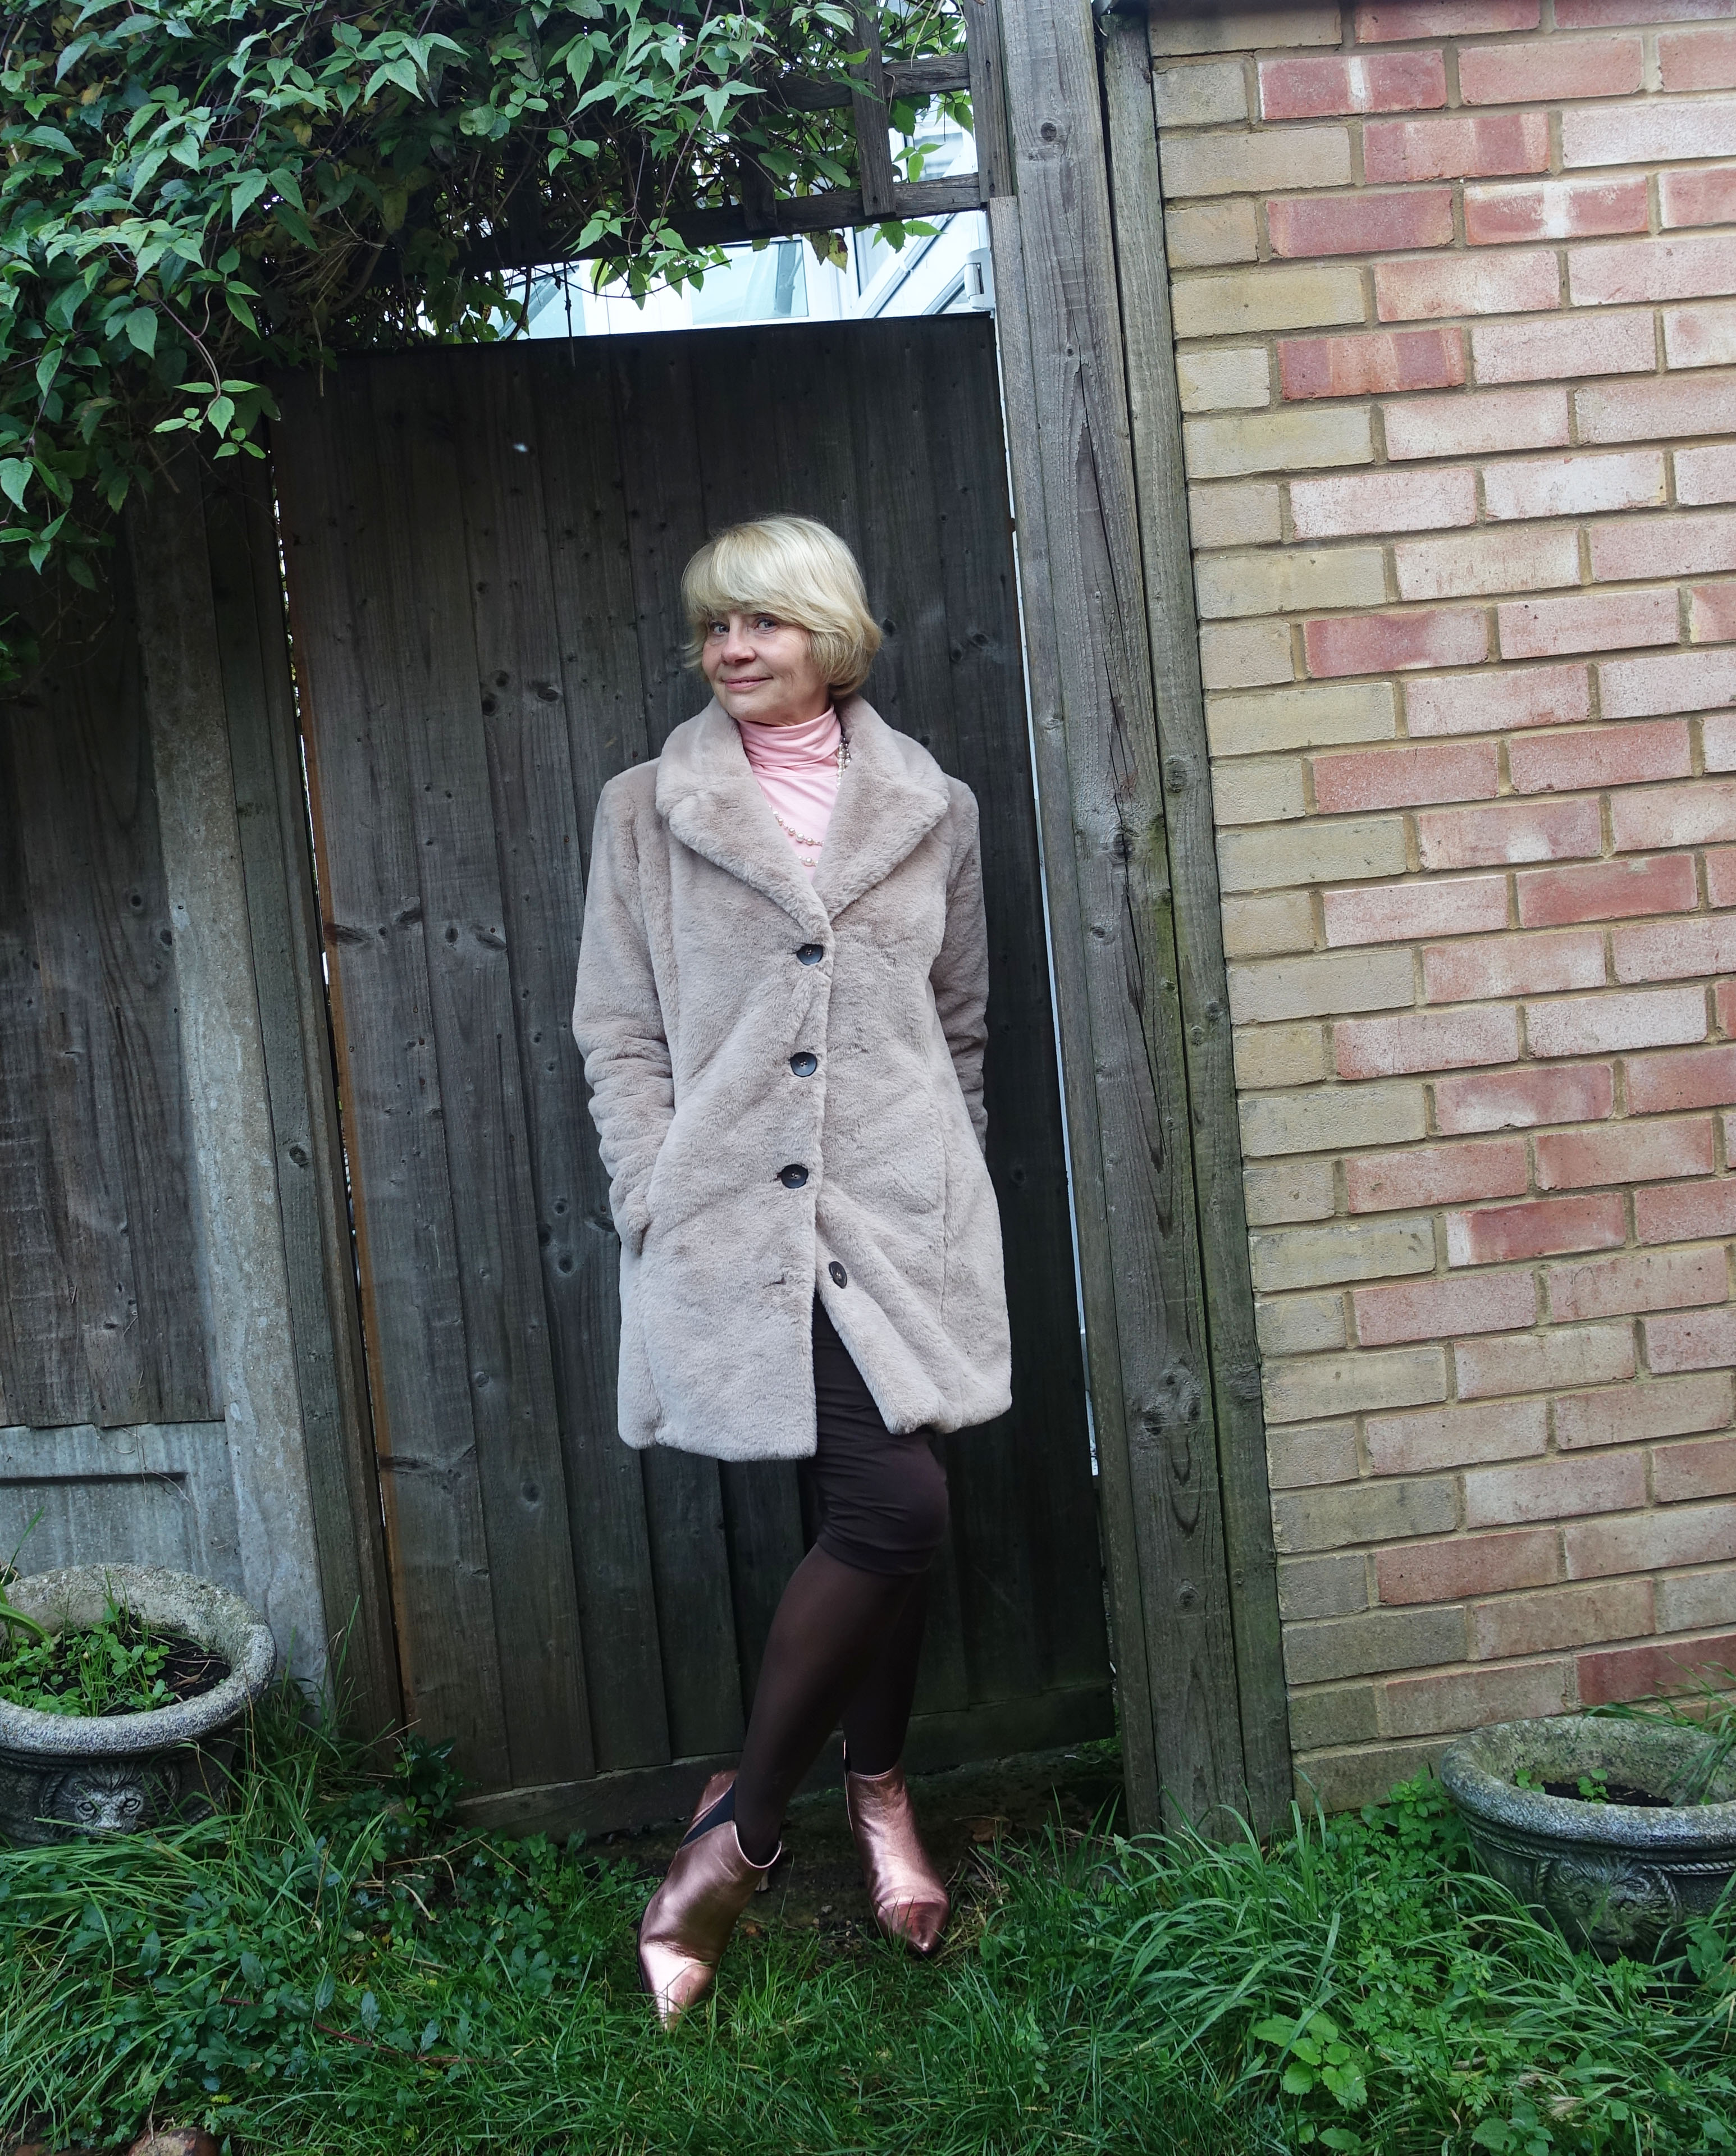 Gail Hanlon from over-50s style blog Is This Mutton in champagne faux fur coat from Cotton Traders